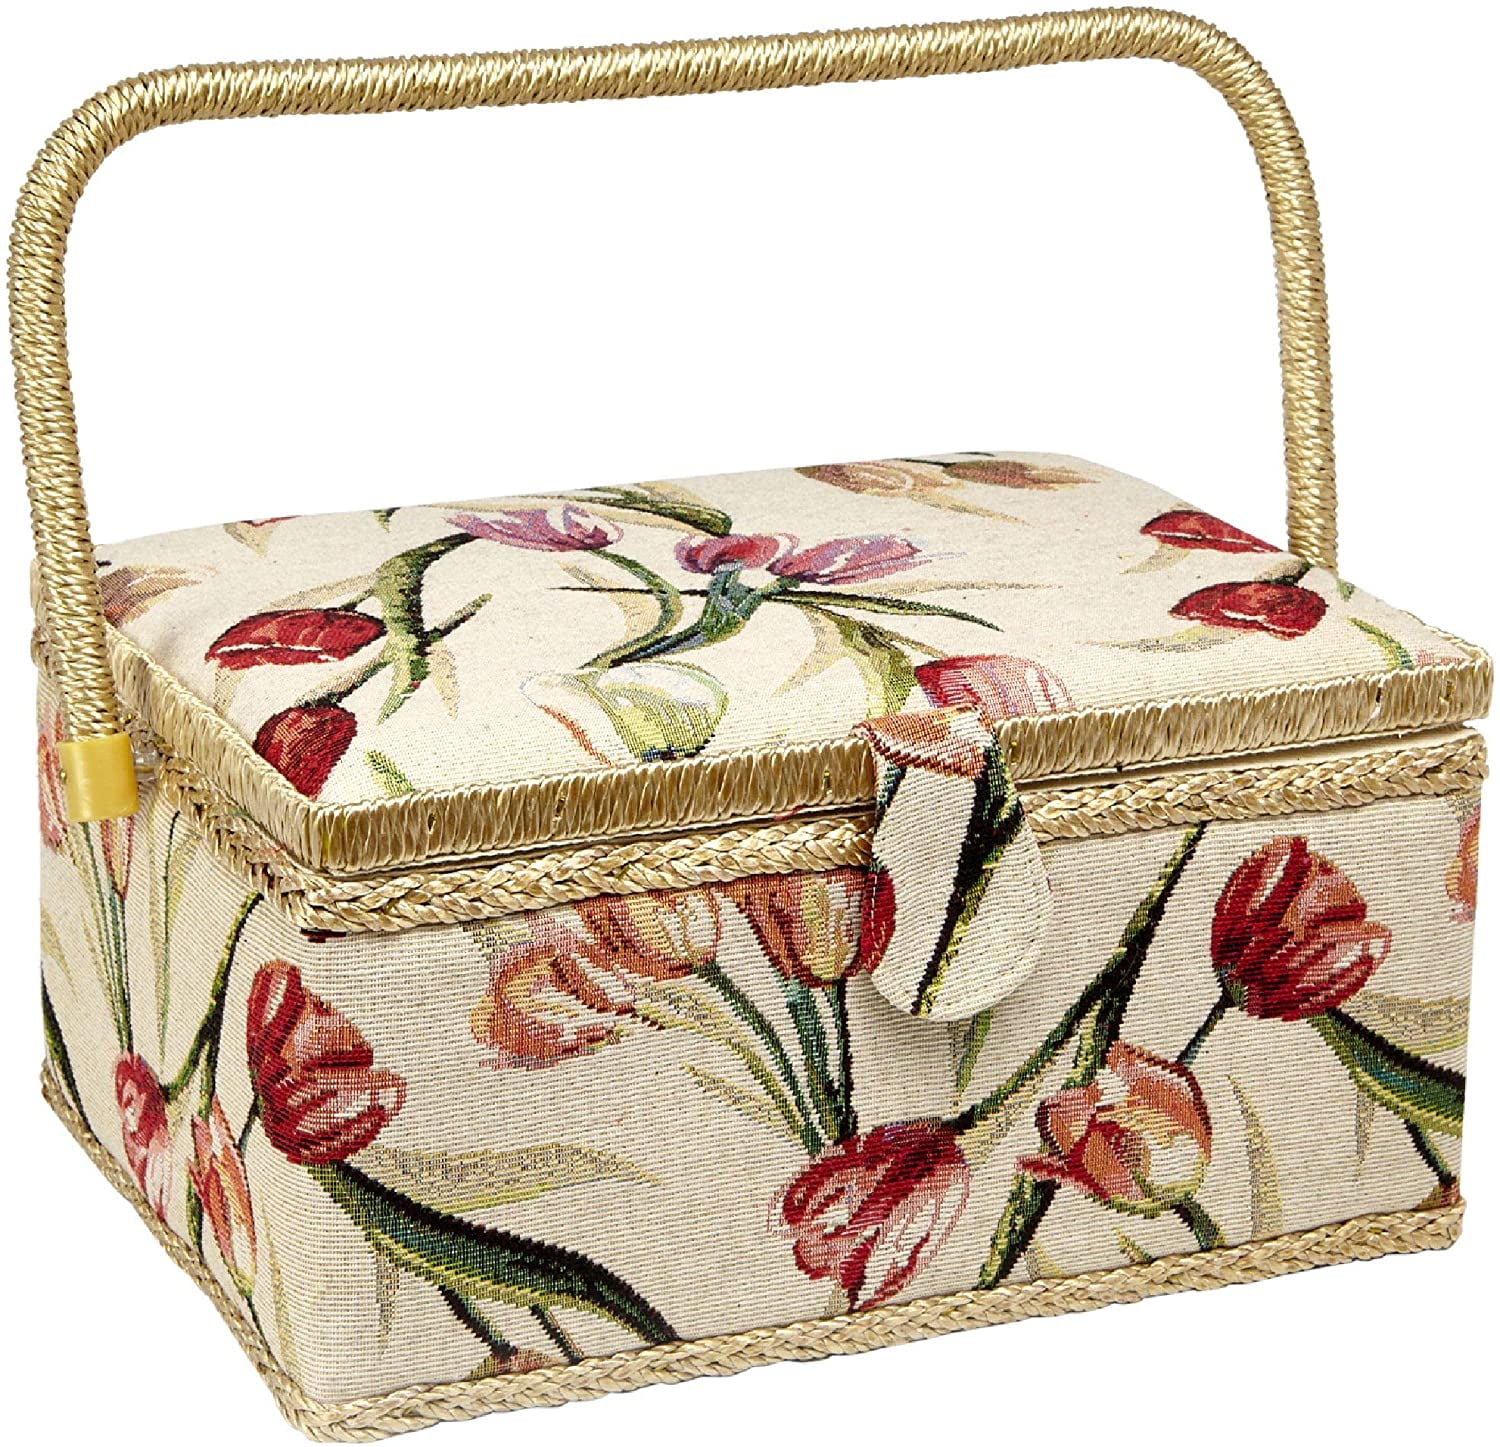 G Type Garden Rose Sewing Box Jadpes Fabric Floral Printed Sewing Basket Craft Box Household Sundry Storage Organizer with Handle Built-in Pin Cushion Interior Pocket 